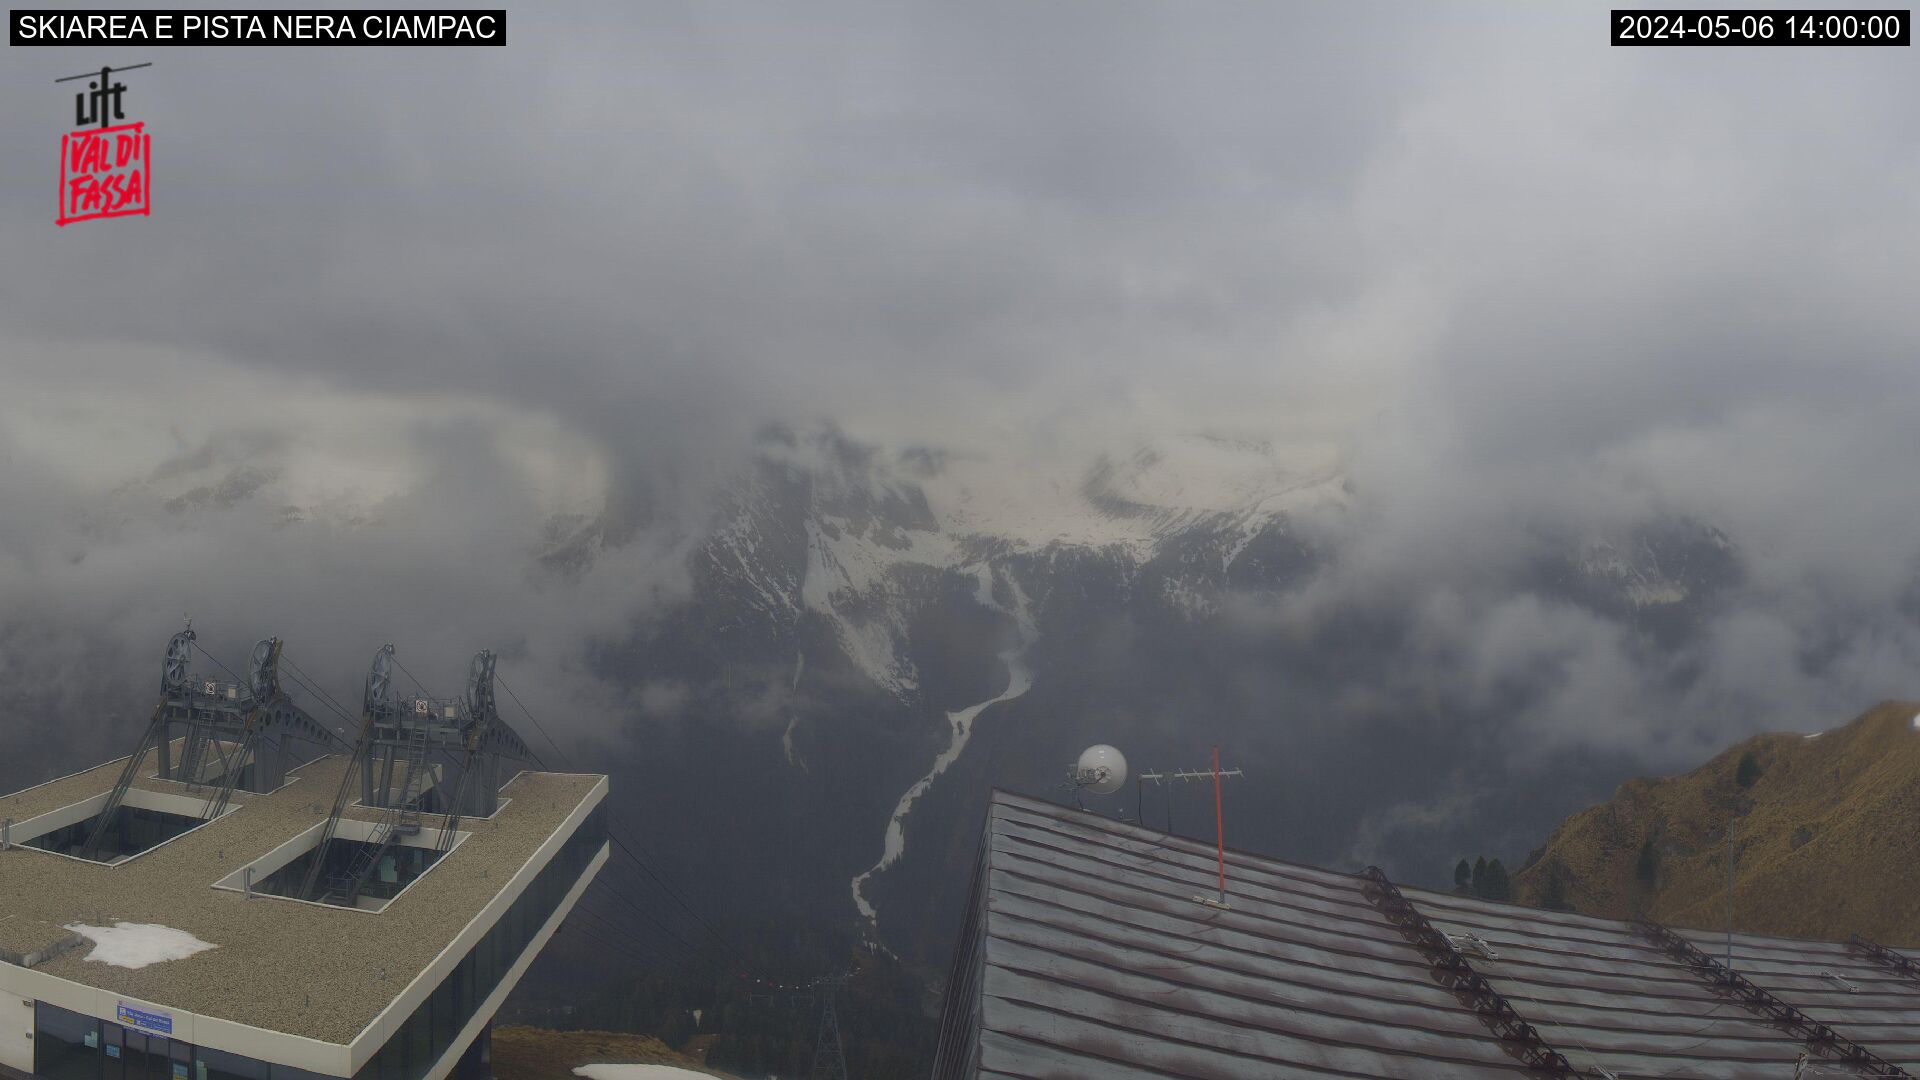 Webcam Alba di Canazei - Ciampac Skiweg - Altitude: 2,376 metresArea: Col dei Rossi Panoramic viewpoint: static webcam. View from the top station of the 